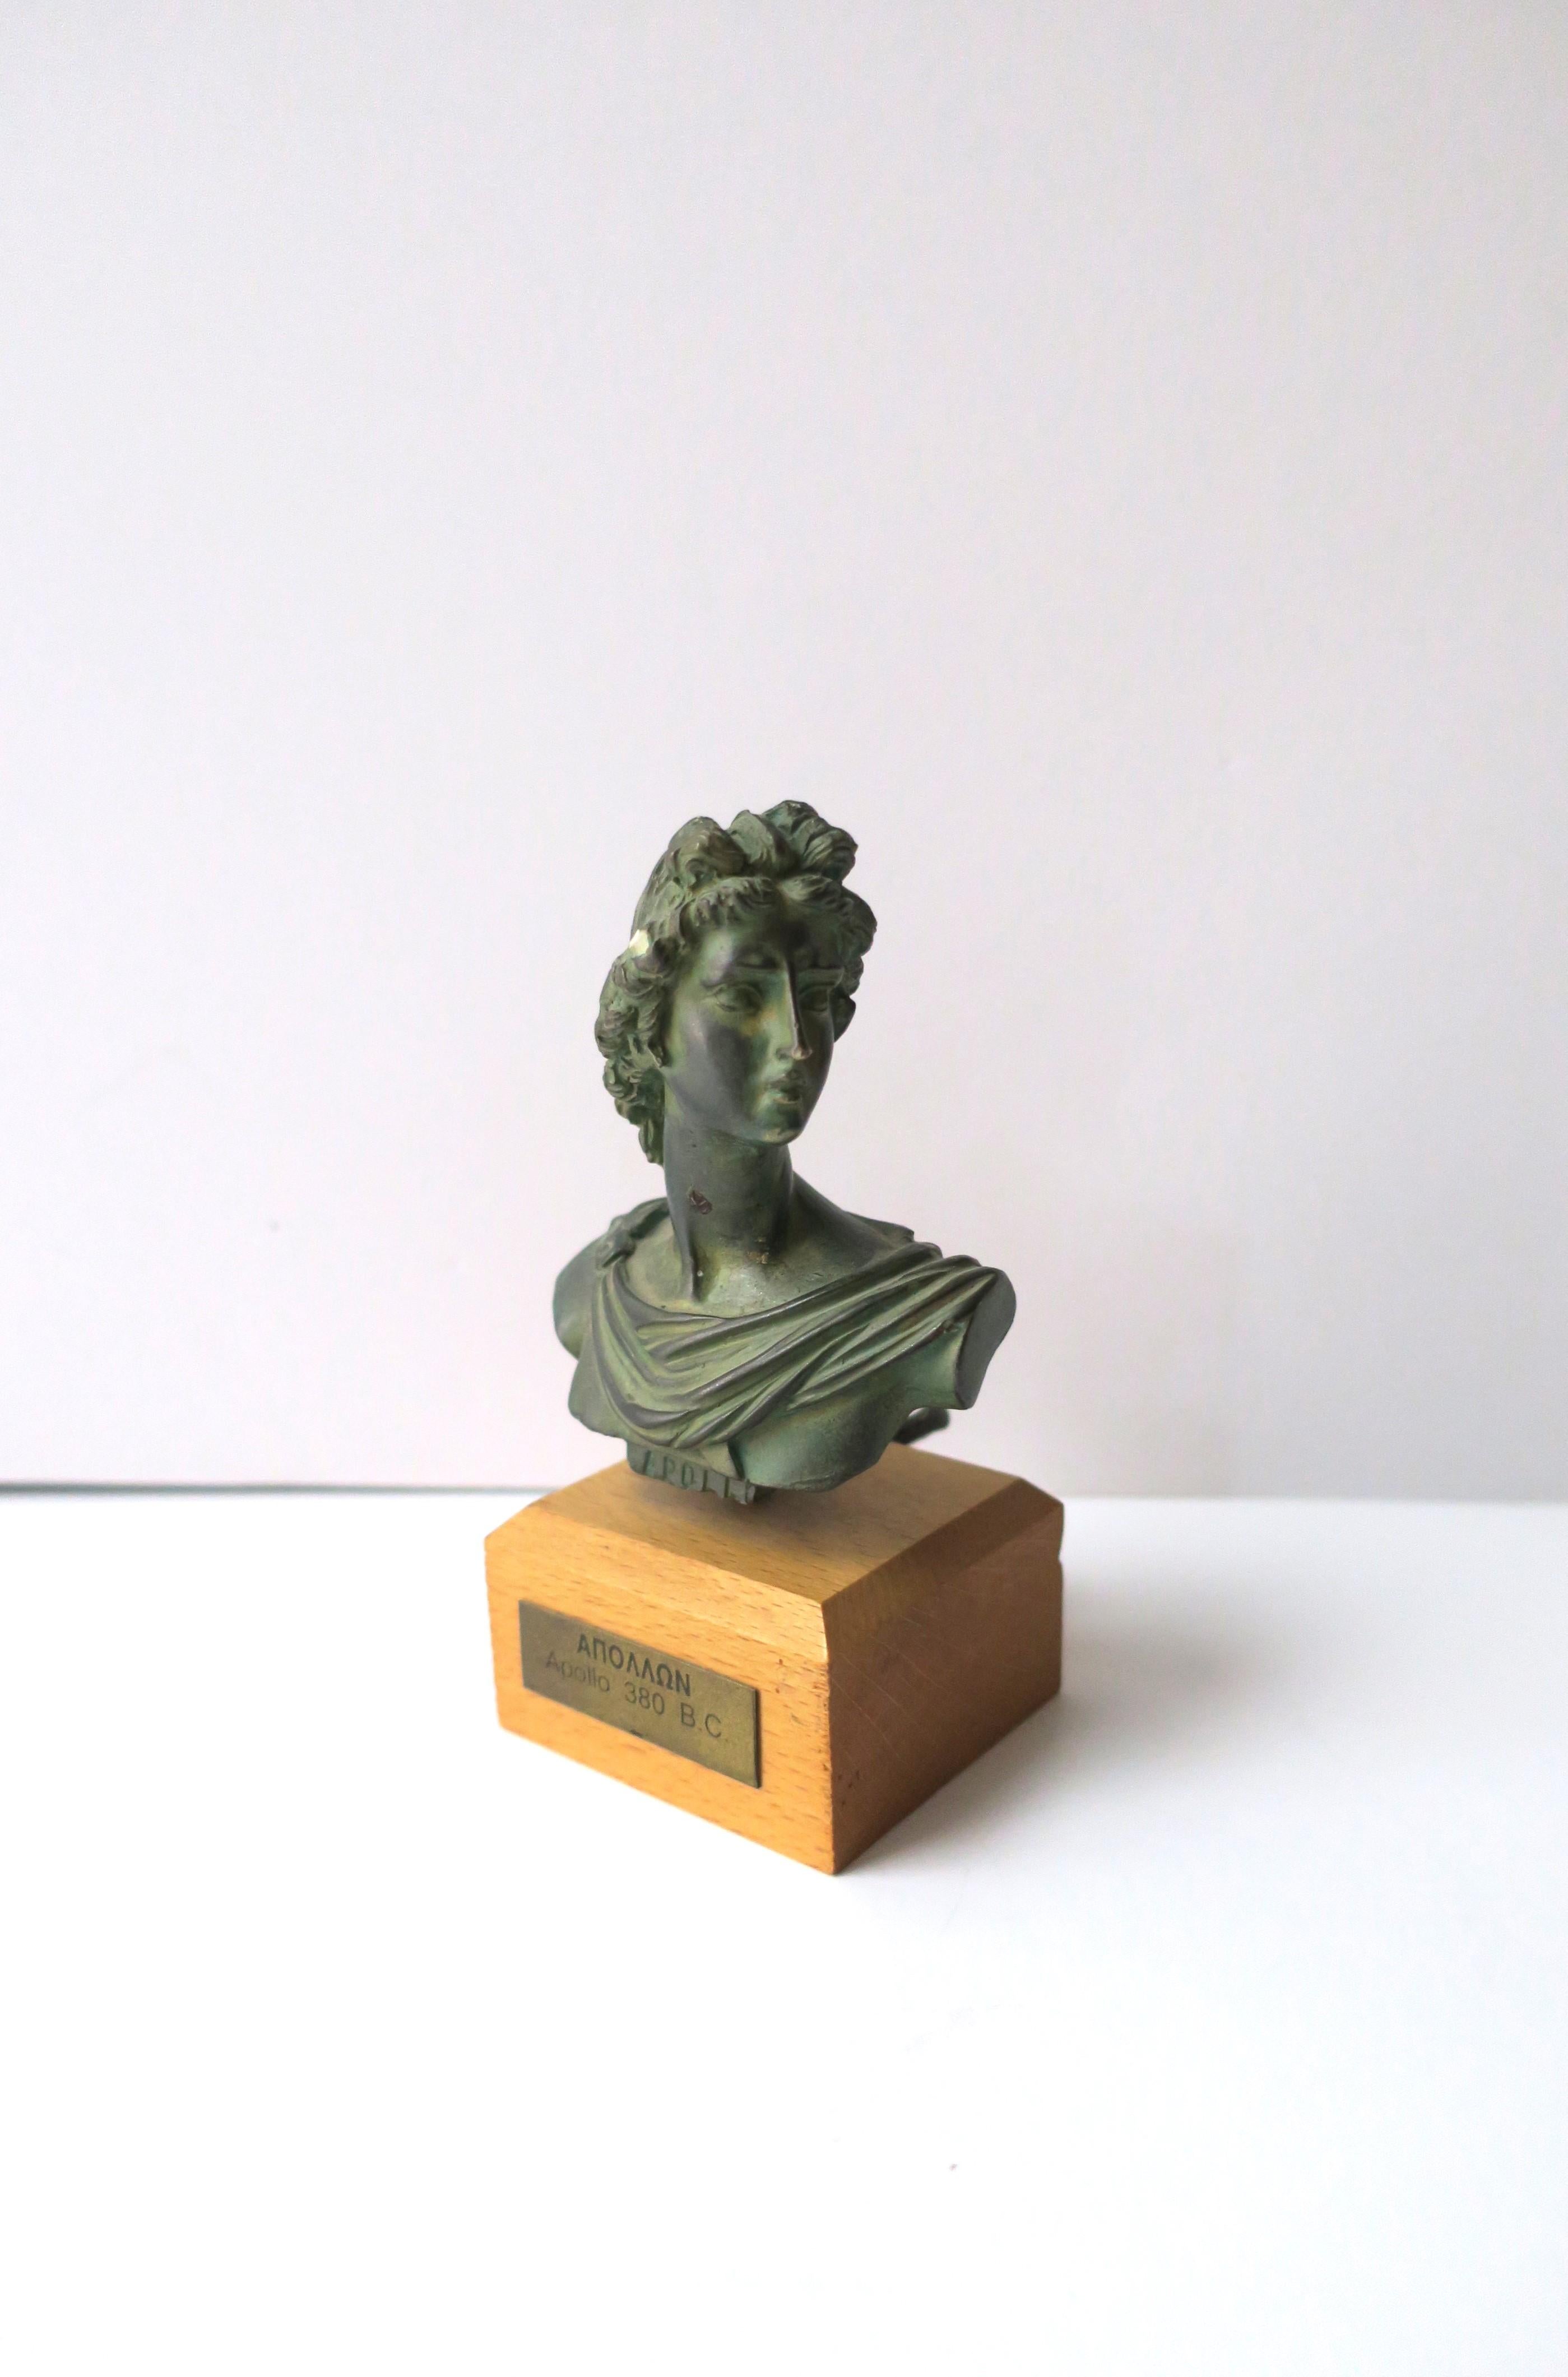 Molded Bust of Apollo, Small 